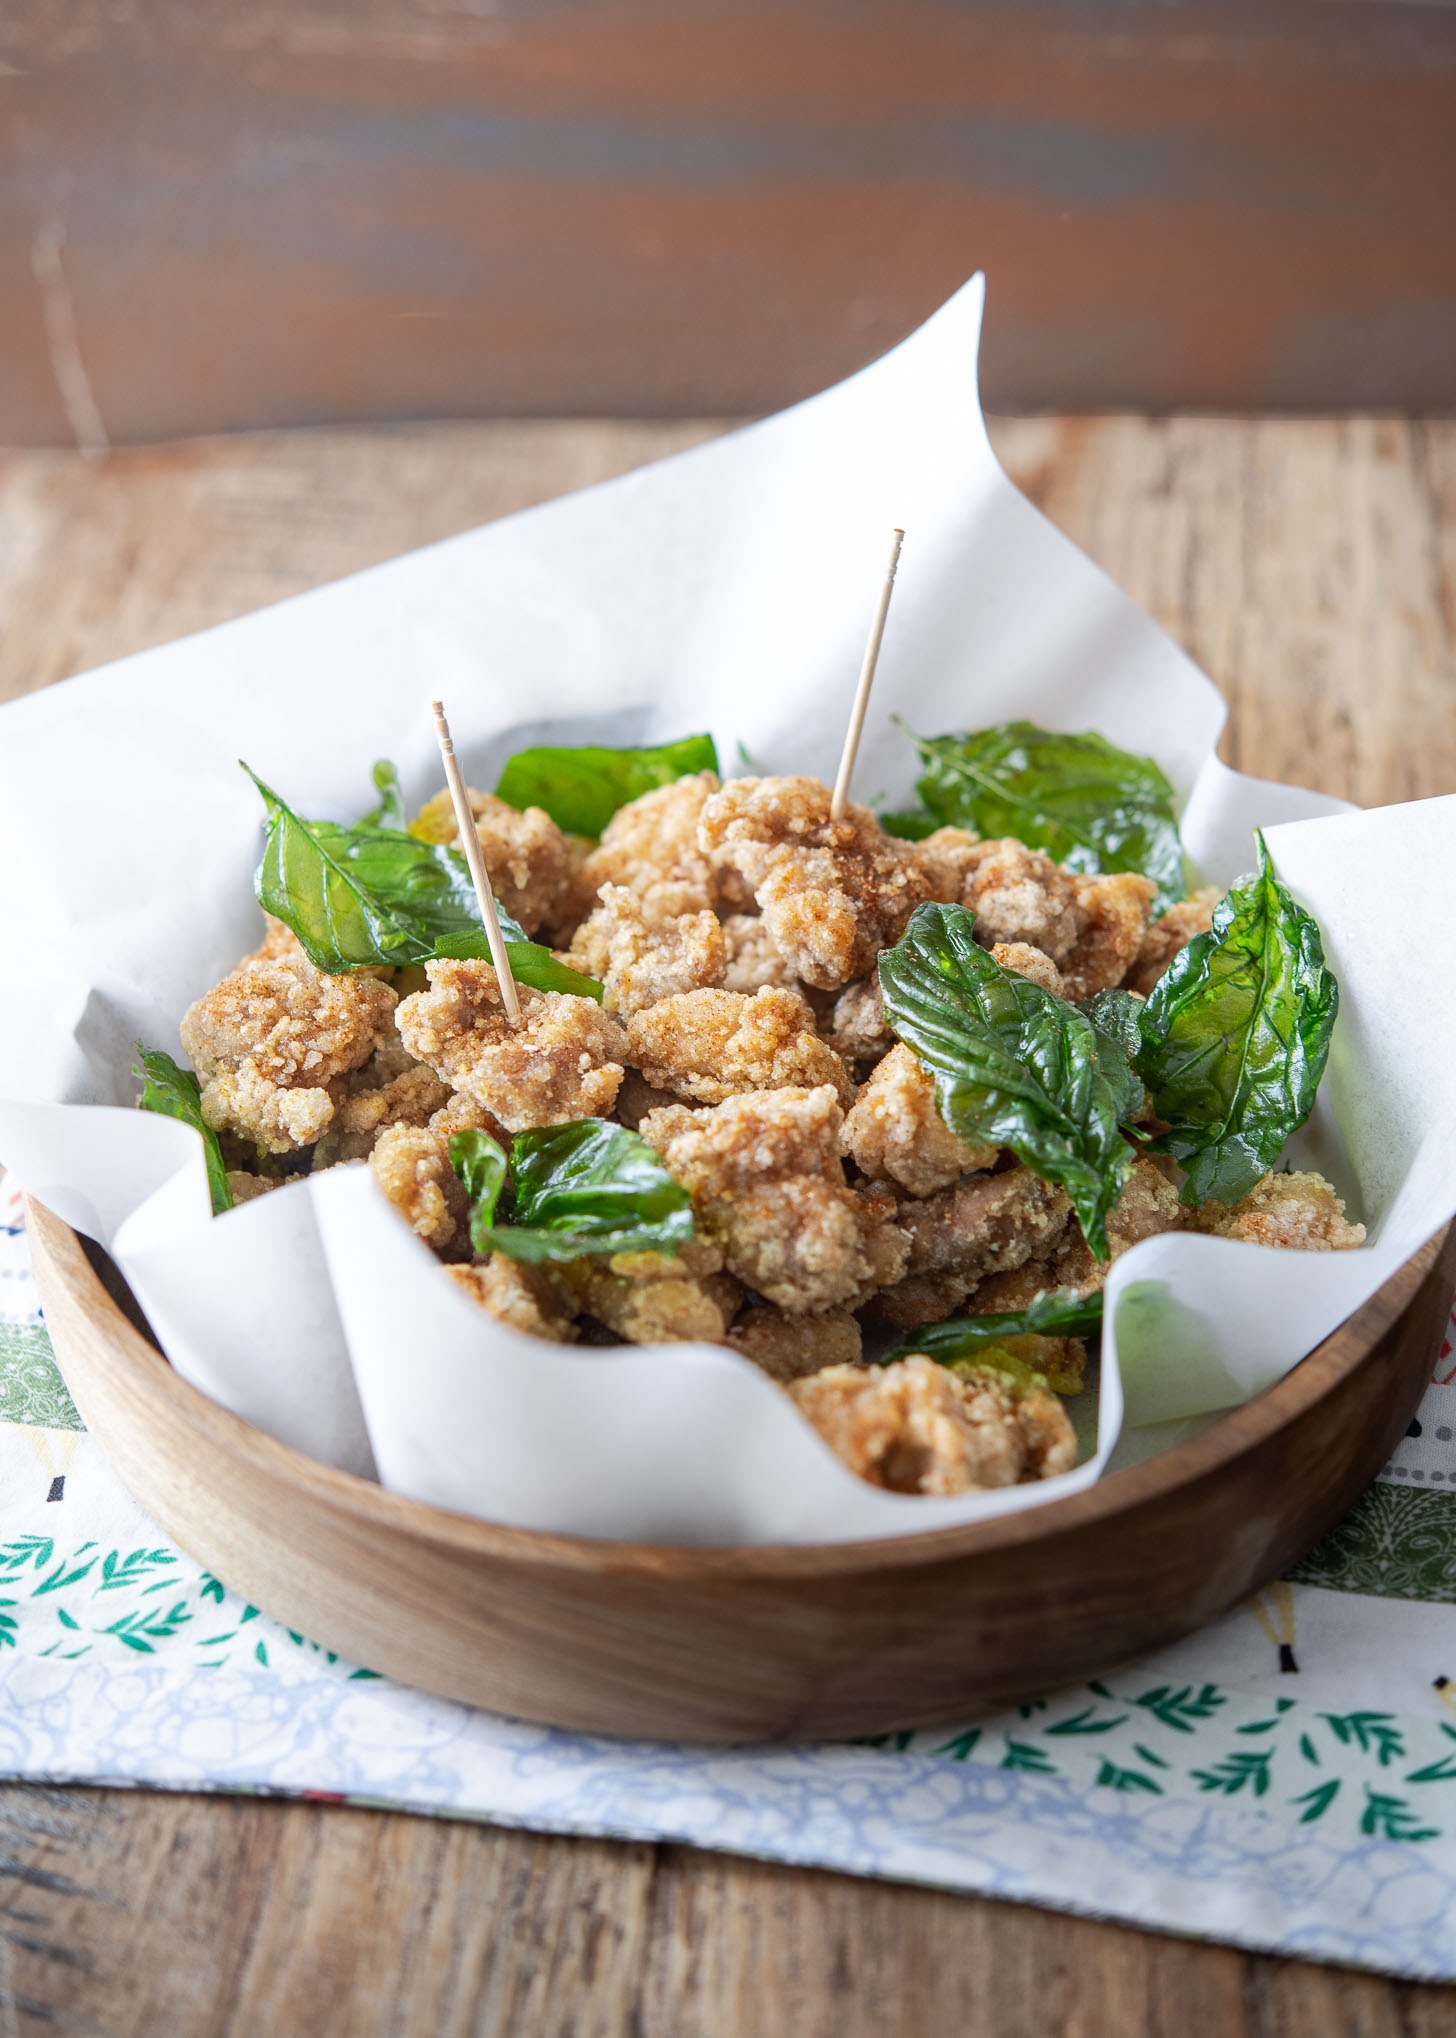 Taiwanese popcorn chicken garnished with fried basil and toothpicks in a serving bowl.